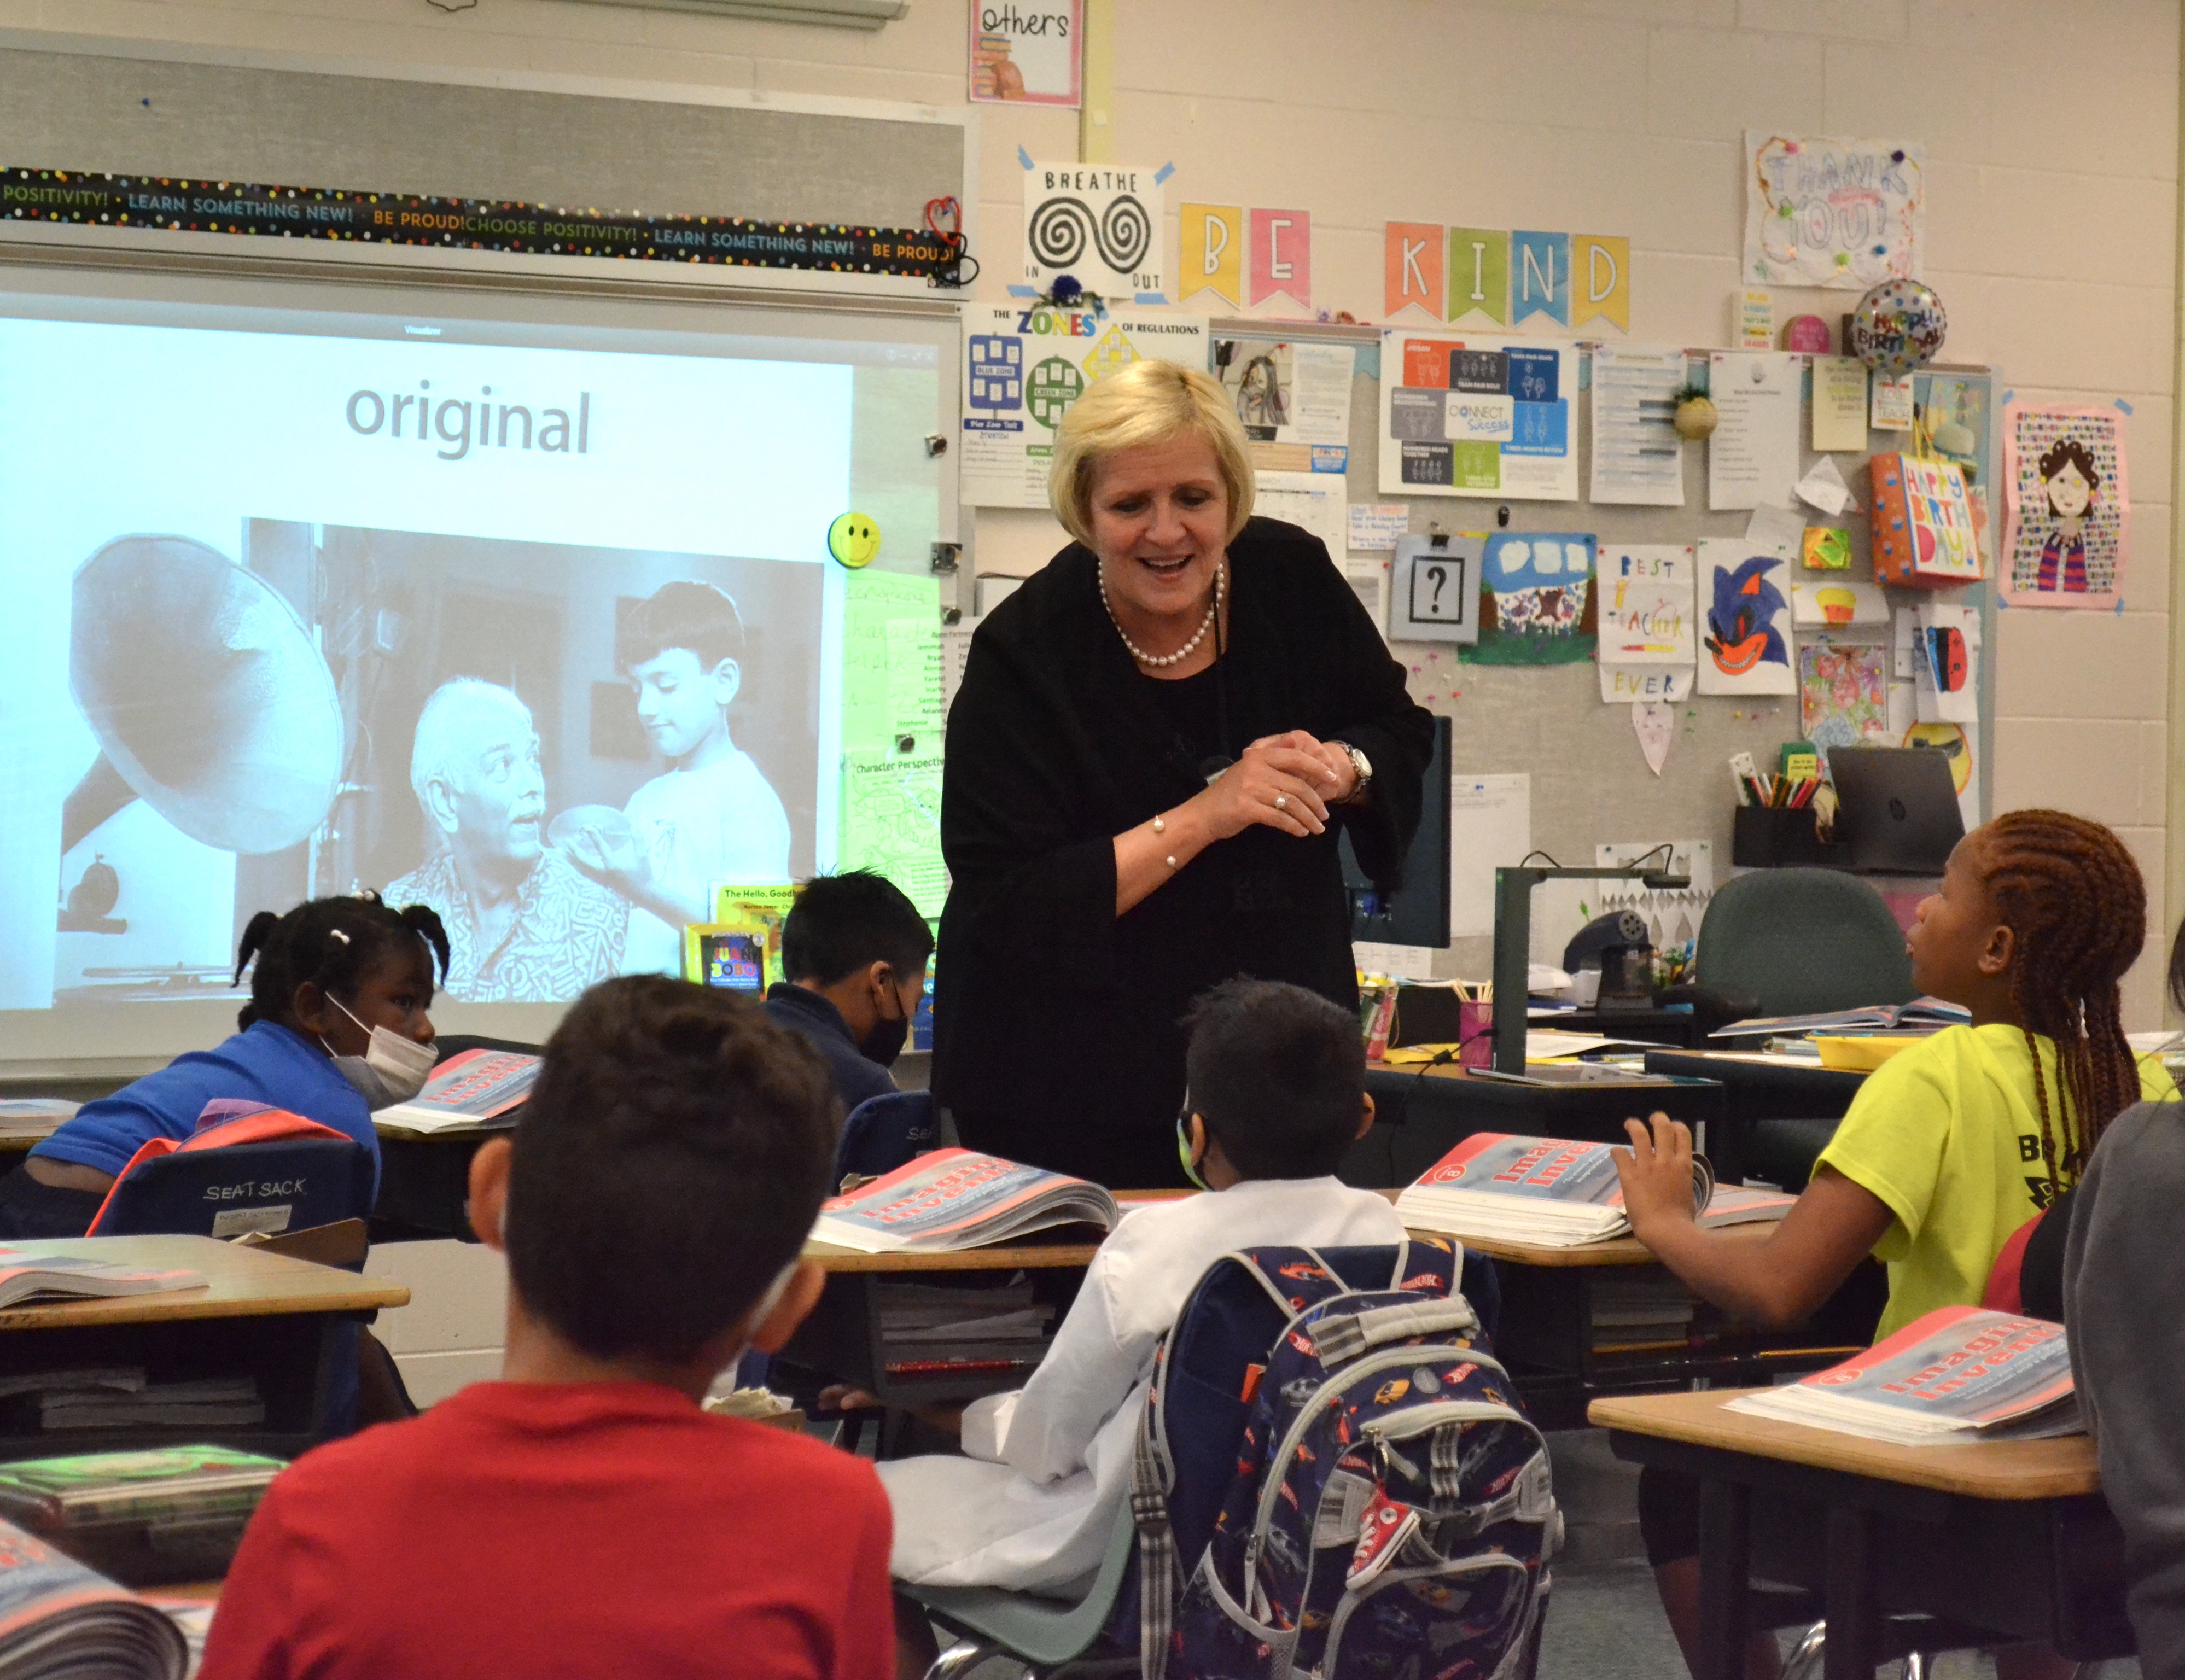 Kamela Patton, shown here guest teaching at an elementary school, has been the superintendent of Collier County Public Schools in Florida since 2011.